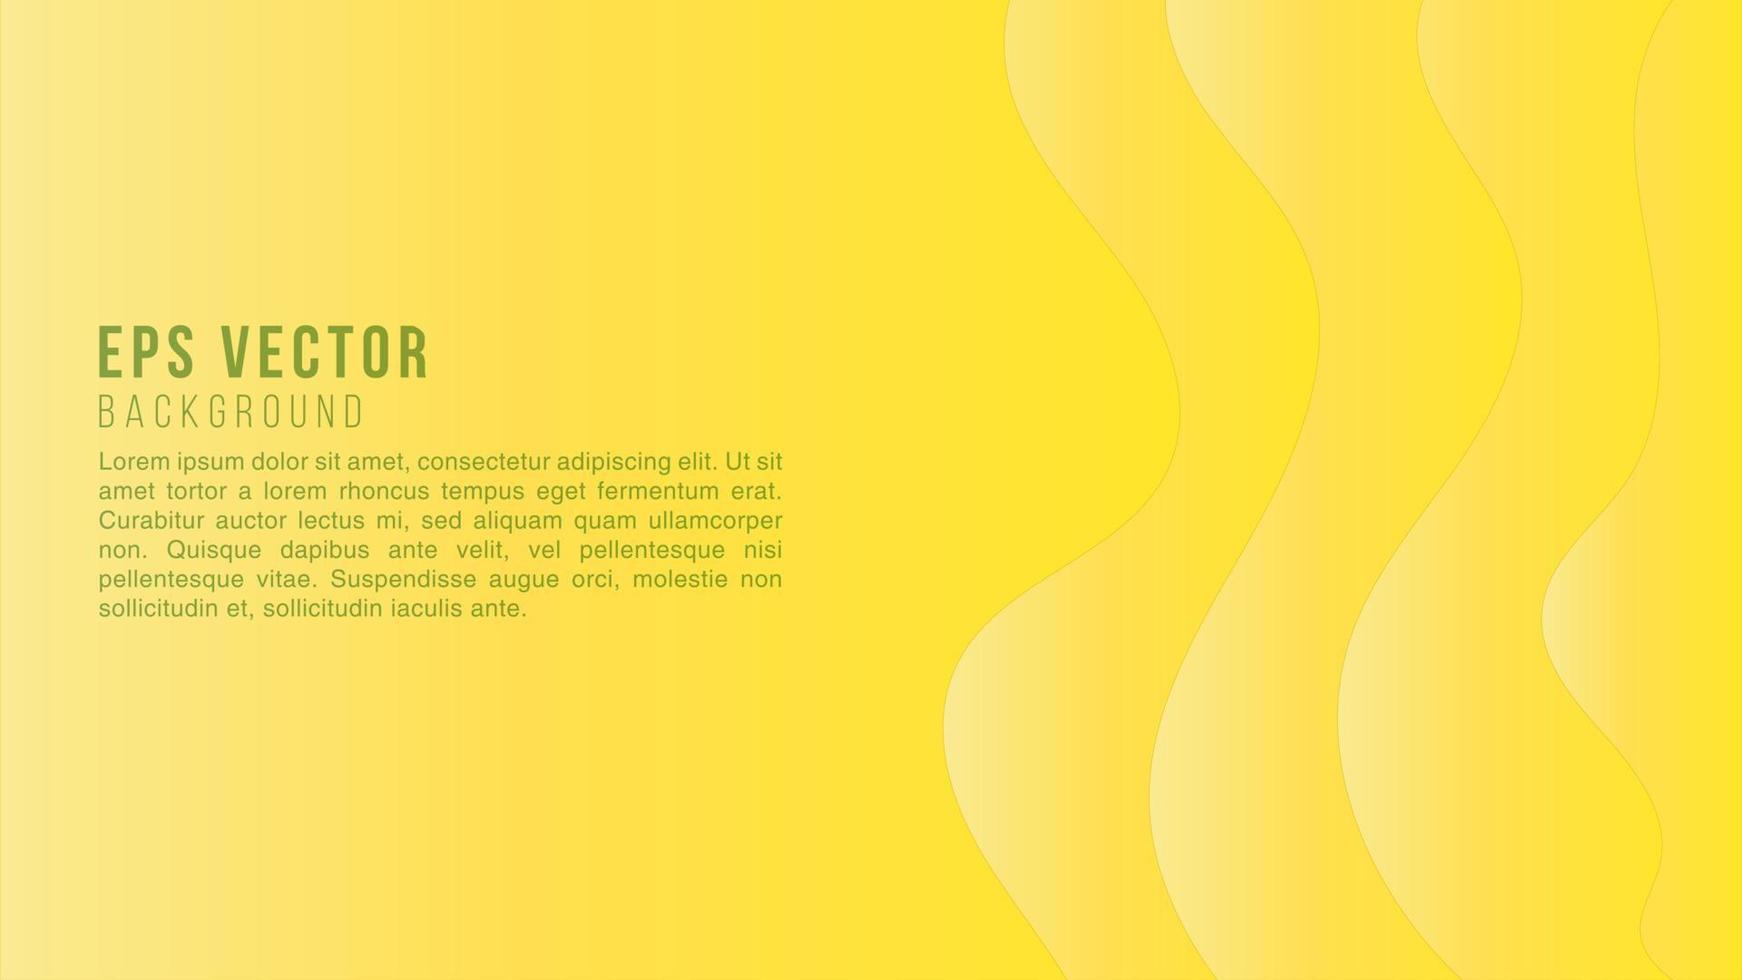 Wavy geometric on yellow background. Trendy gradient shapes composition. Eps10 vector